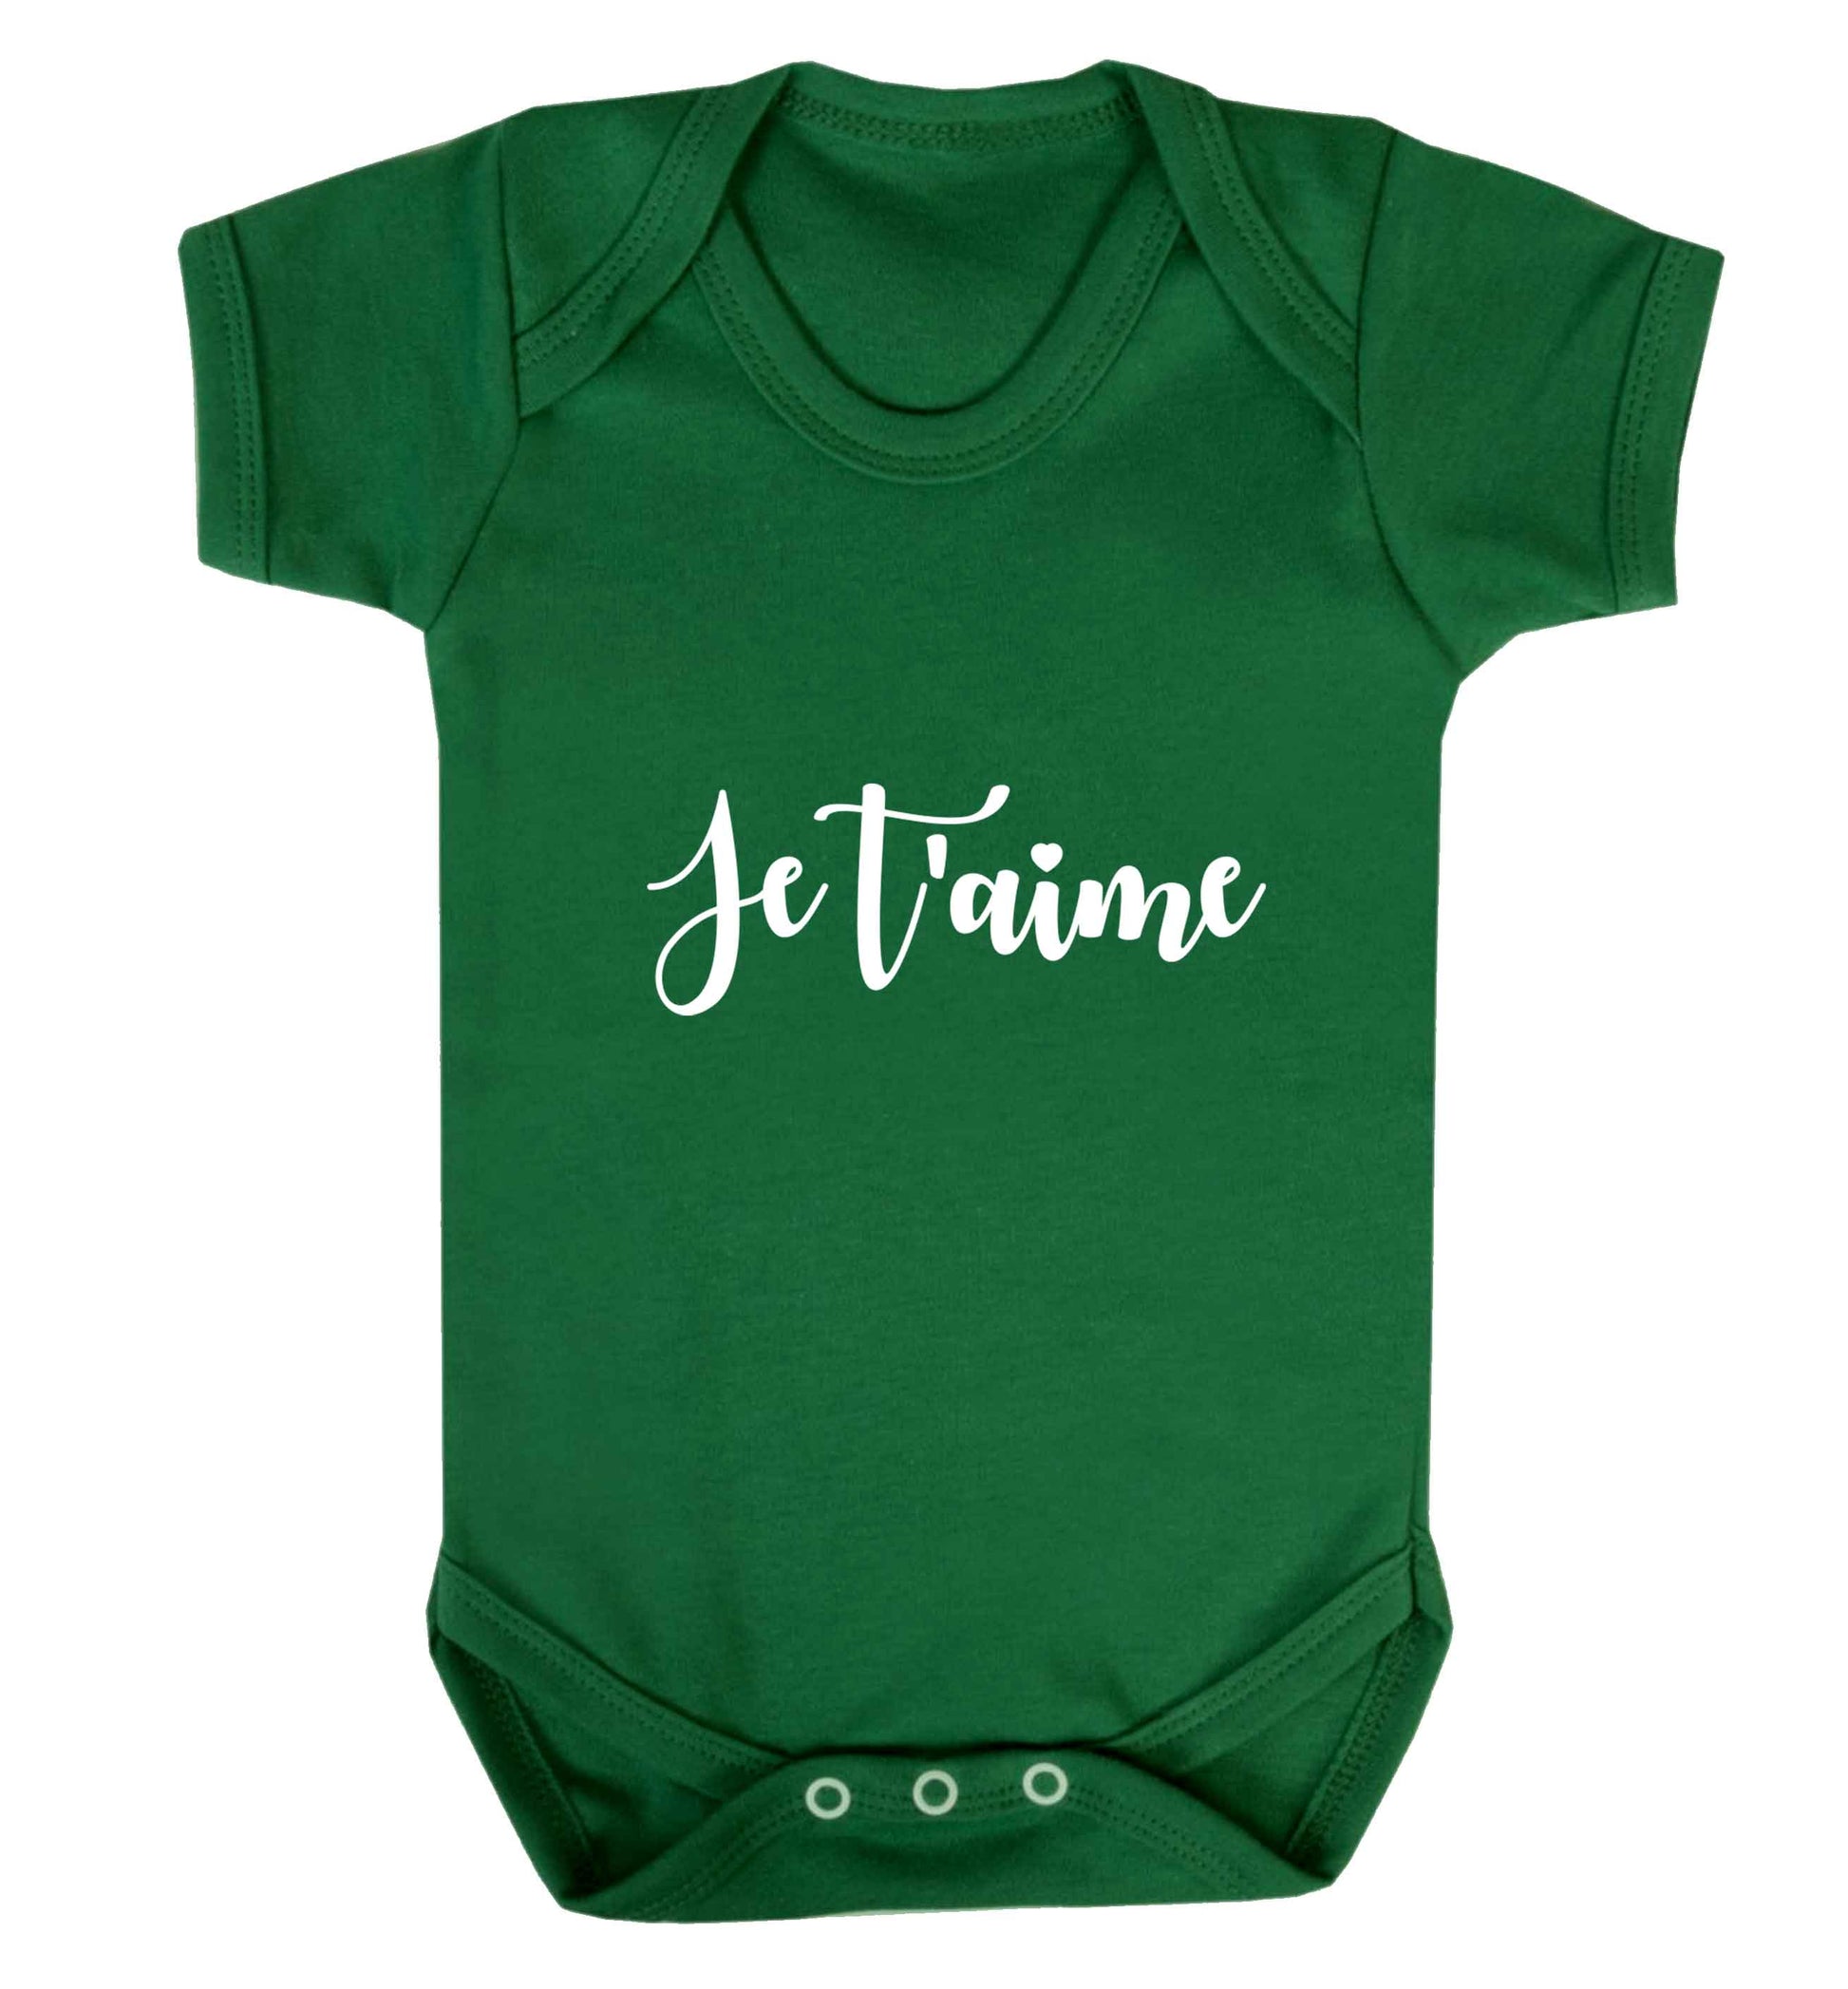 Je t'aime baby vest green 18-24 months